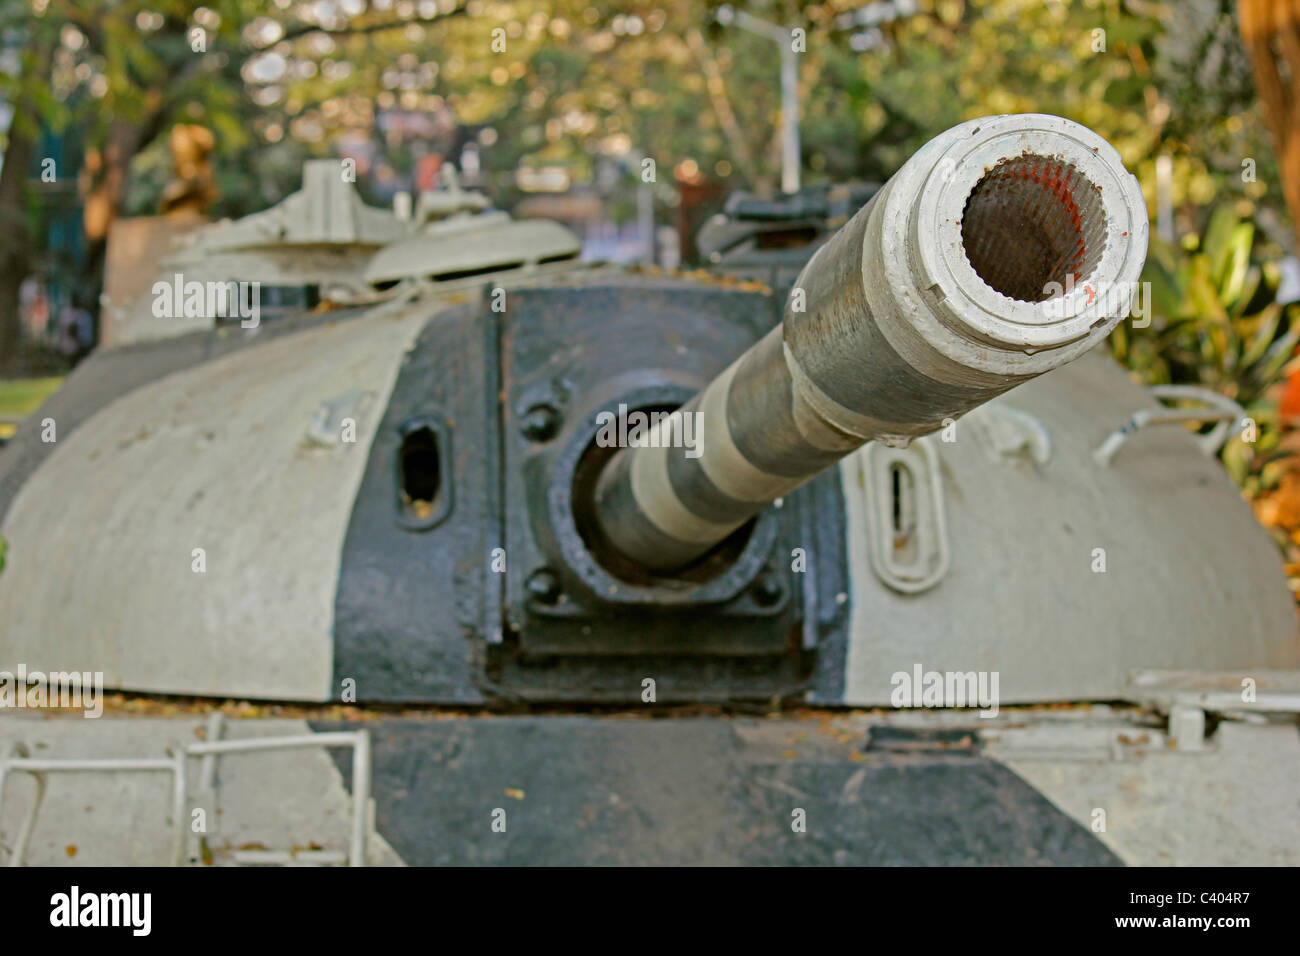 The M48 Patton Tank of the Pakistan Army used in India-Pakistani War of 1965, Cannon in a Garden, Pune, Maharashtra, India Stock Photo